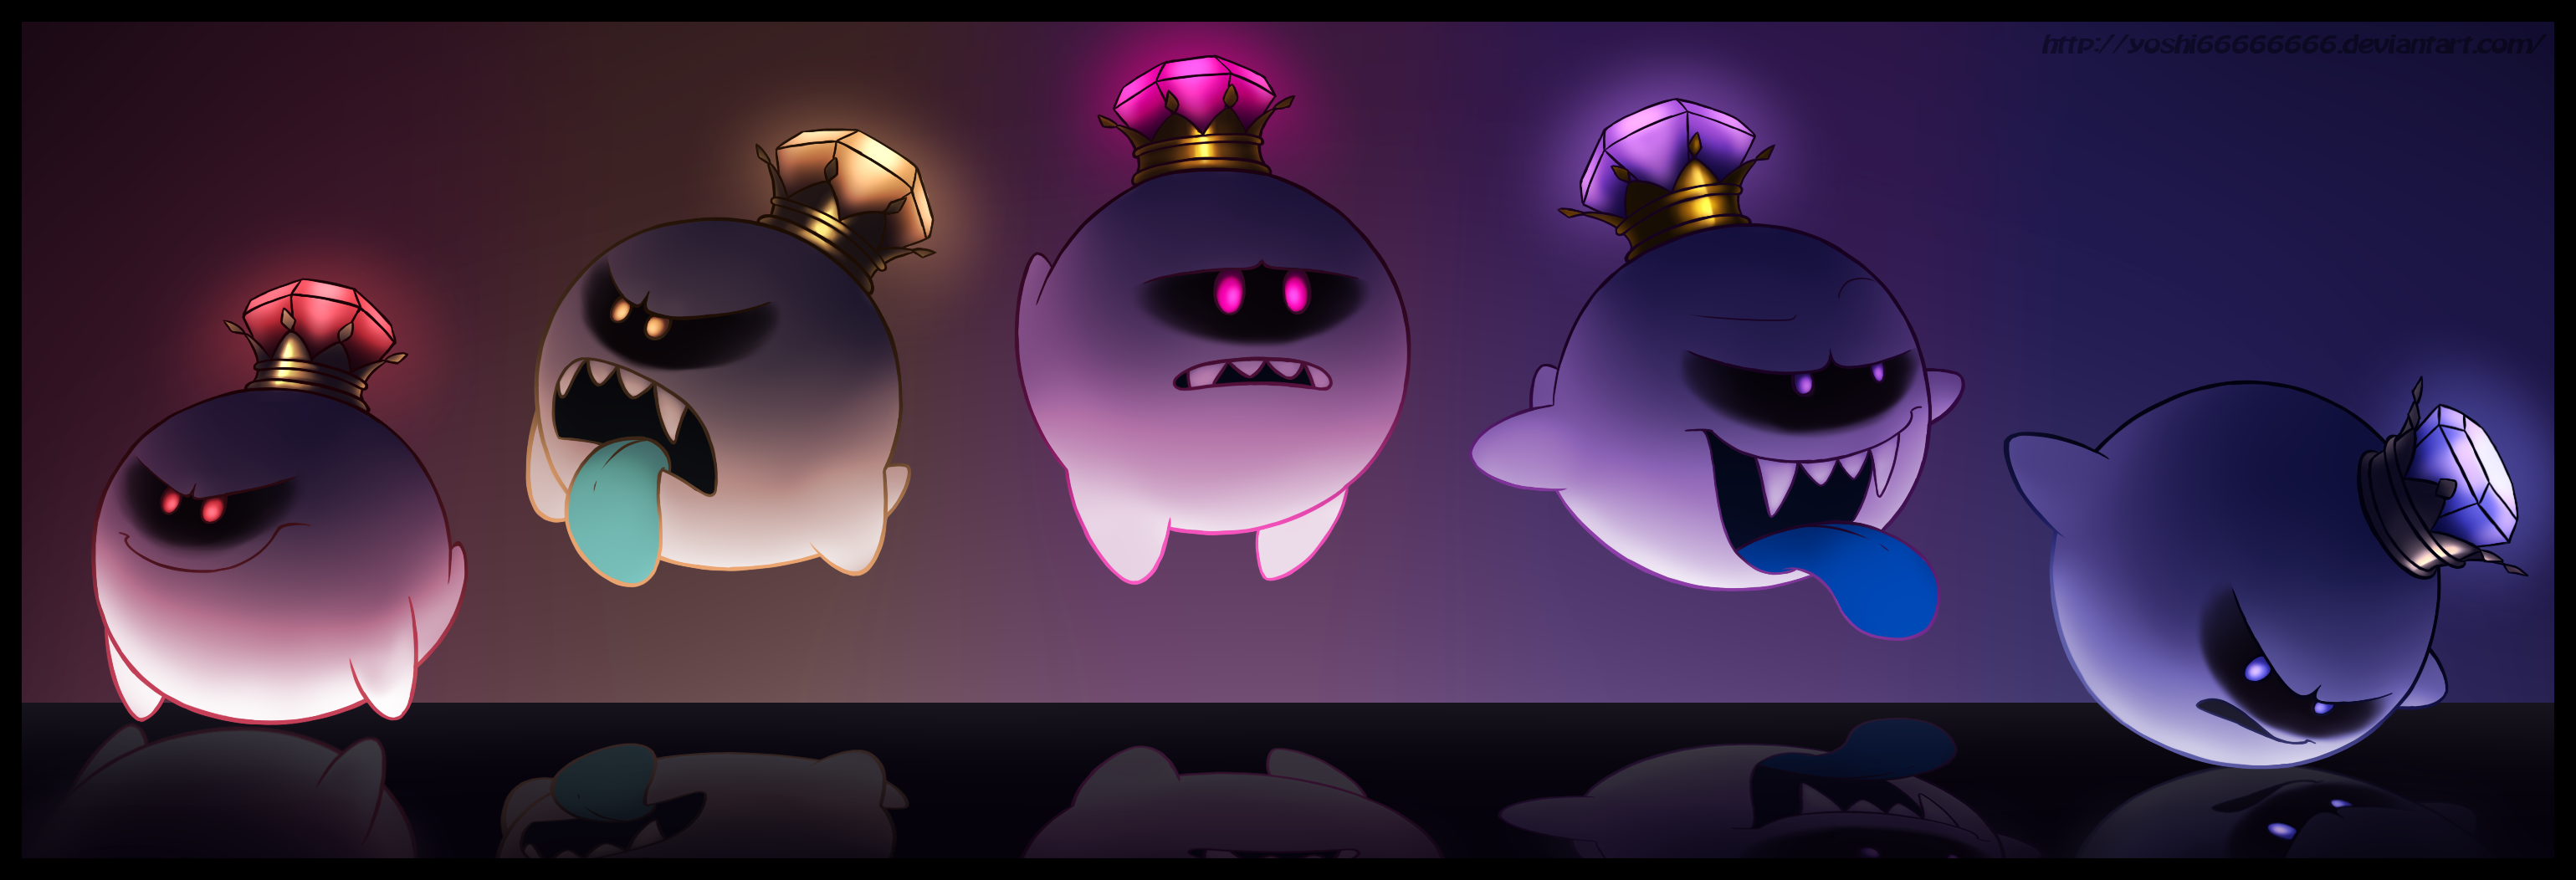 Free download King Boo Doodlessss by Yoshi66666666 on [3079x1052] for your Desktop, Mobile & Tablet. Explore Mario Boo Wallpaper. Mario Wallpaper, Mario Background, Boo Wallpaper